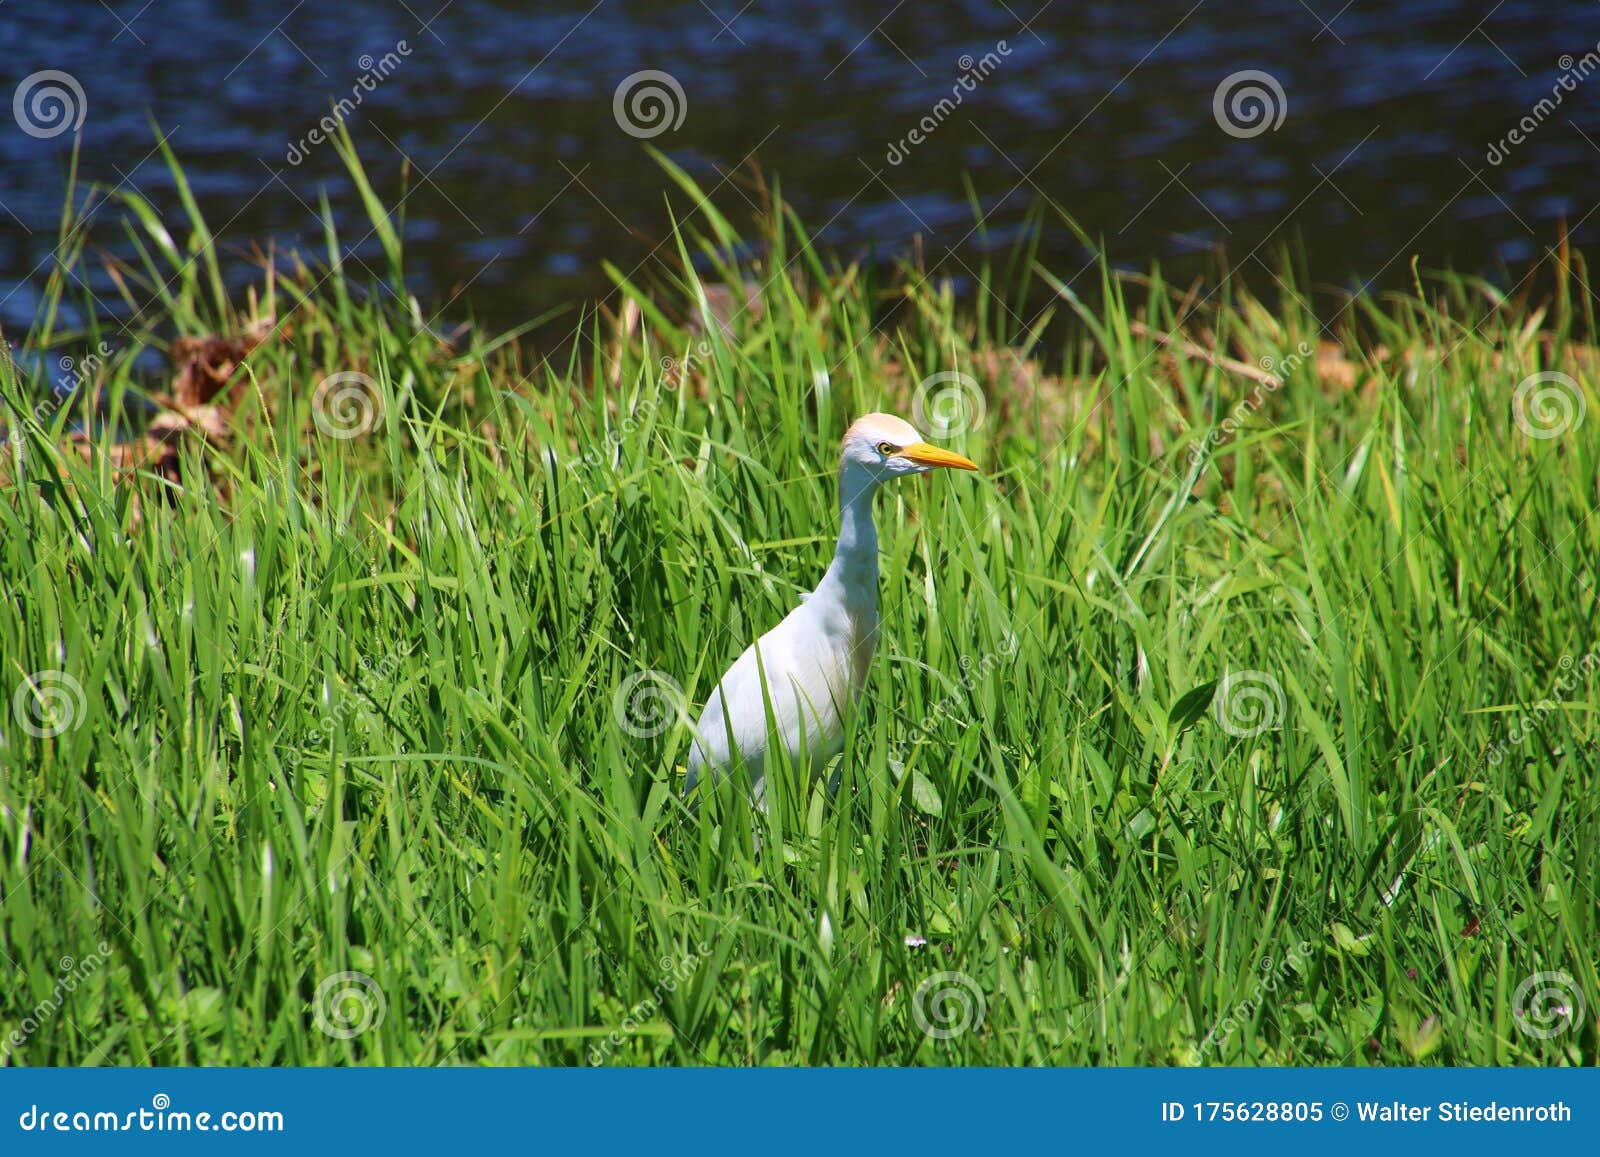 cattle egret in the grass